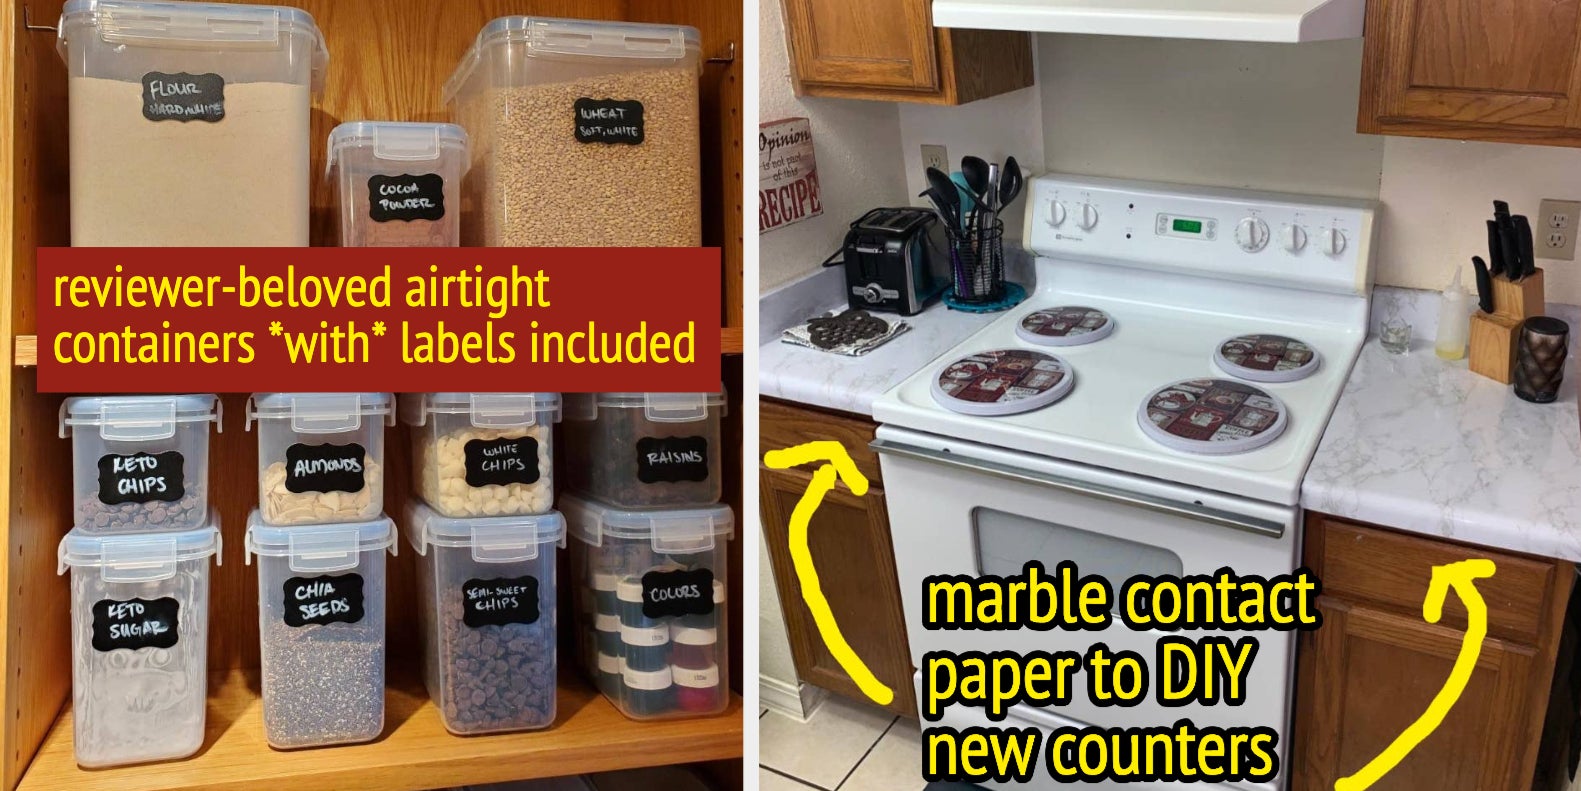 23 Things Anyone With A Tiny Kitchen Needs